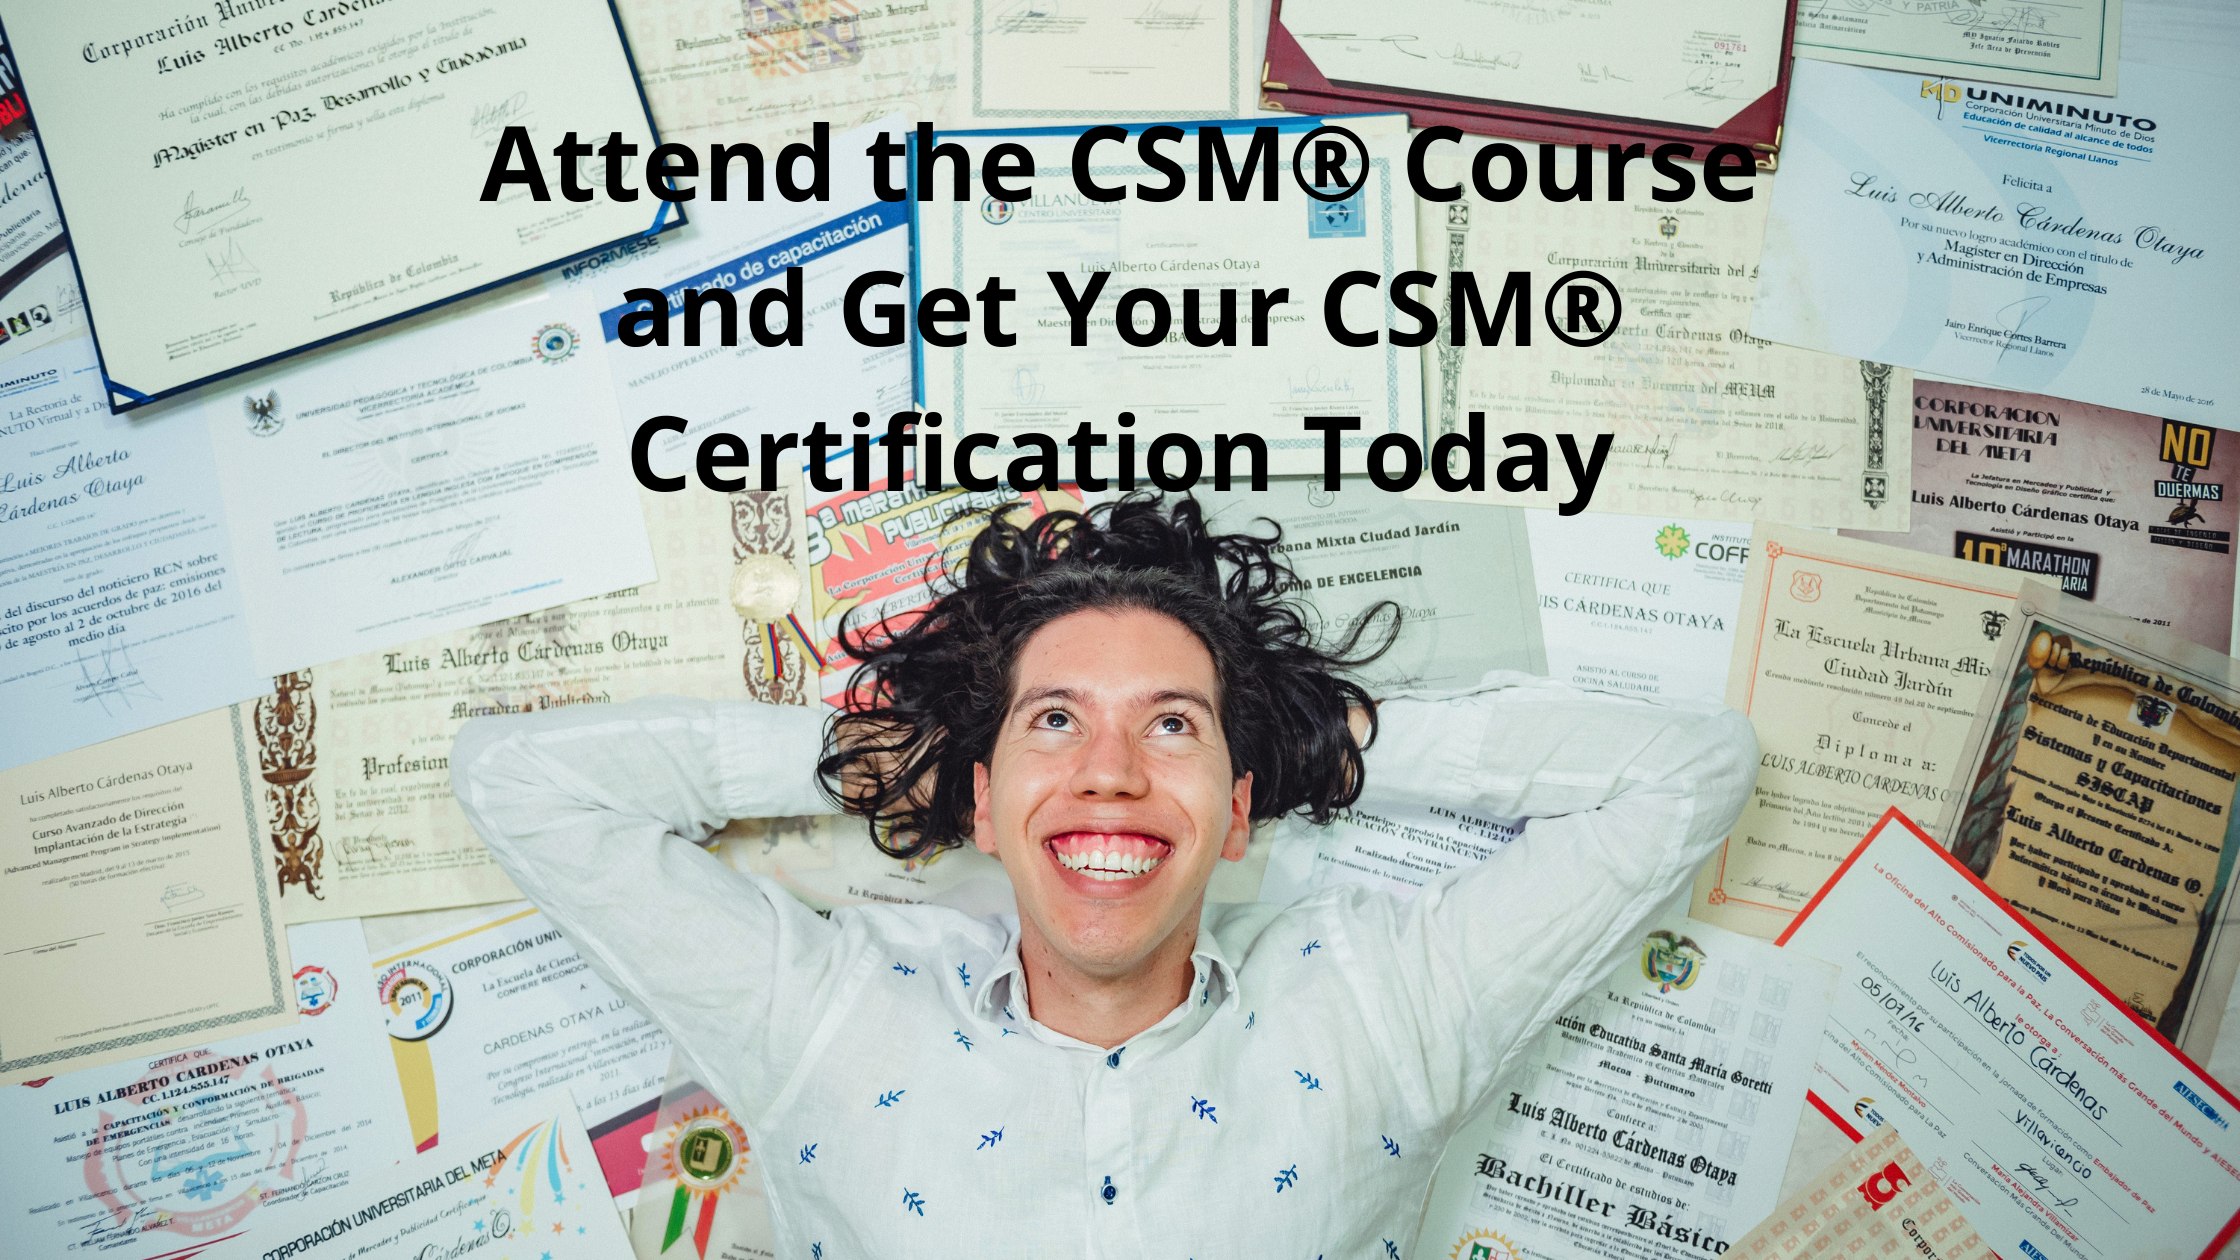 Attend the CSM® Course and Get Your CSM® Certification Today